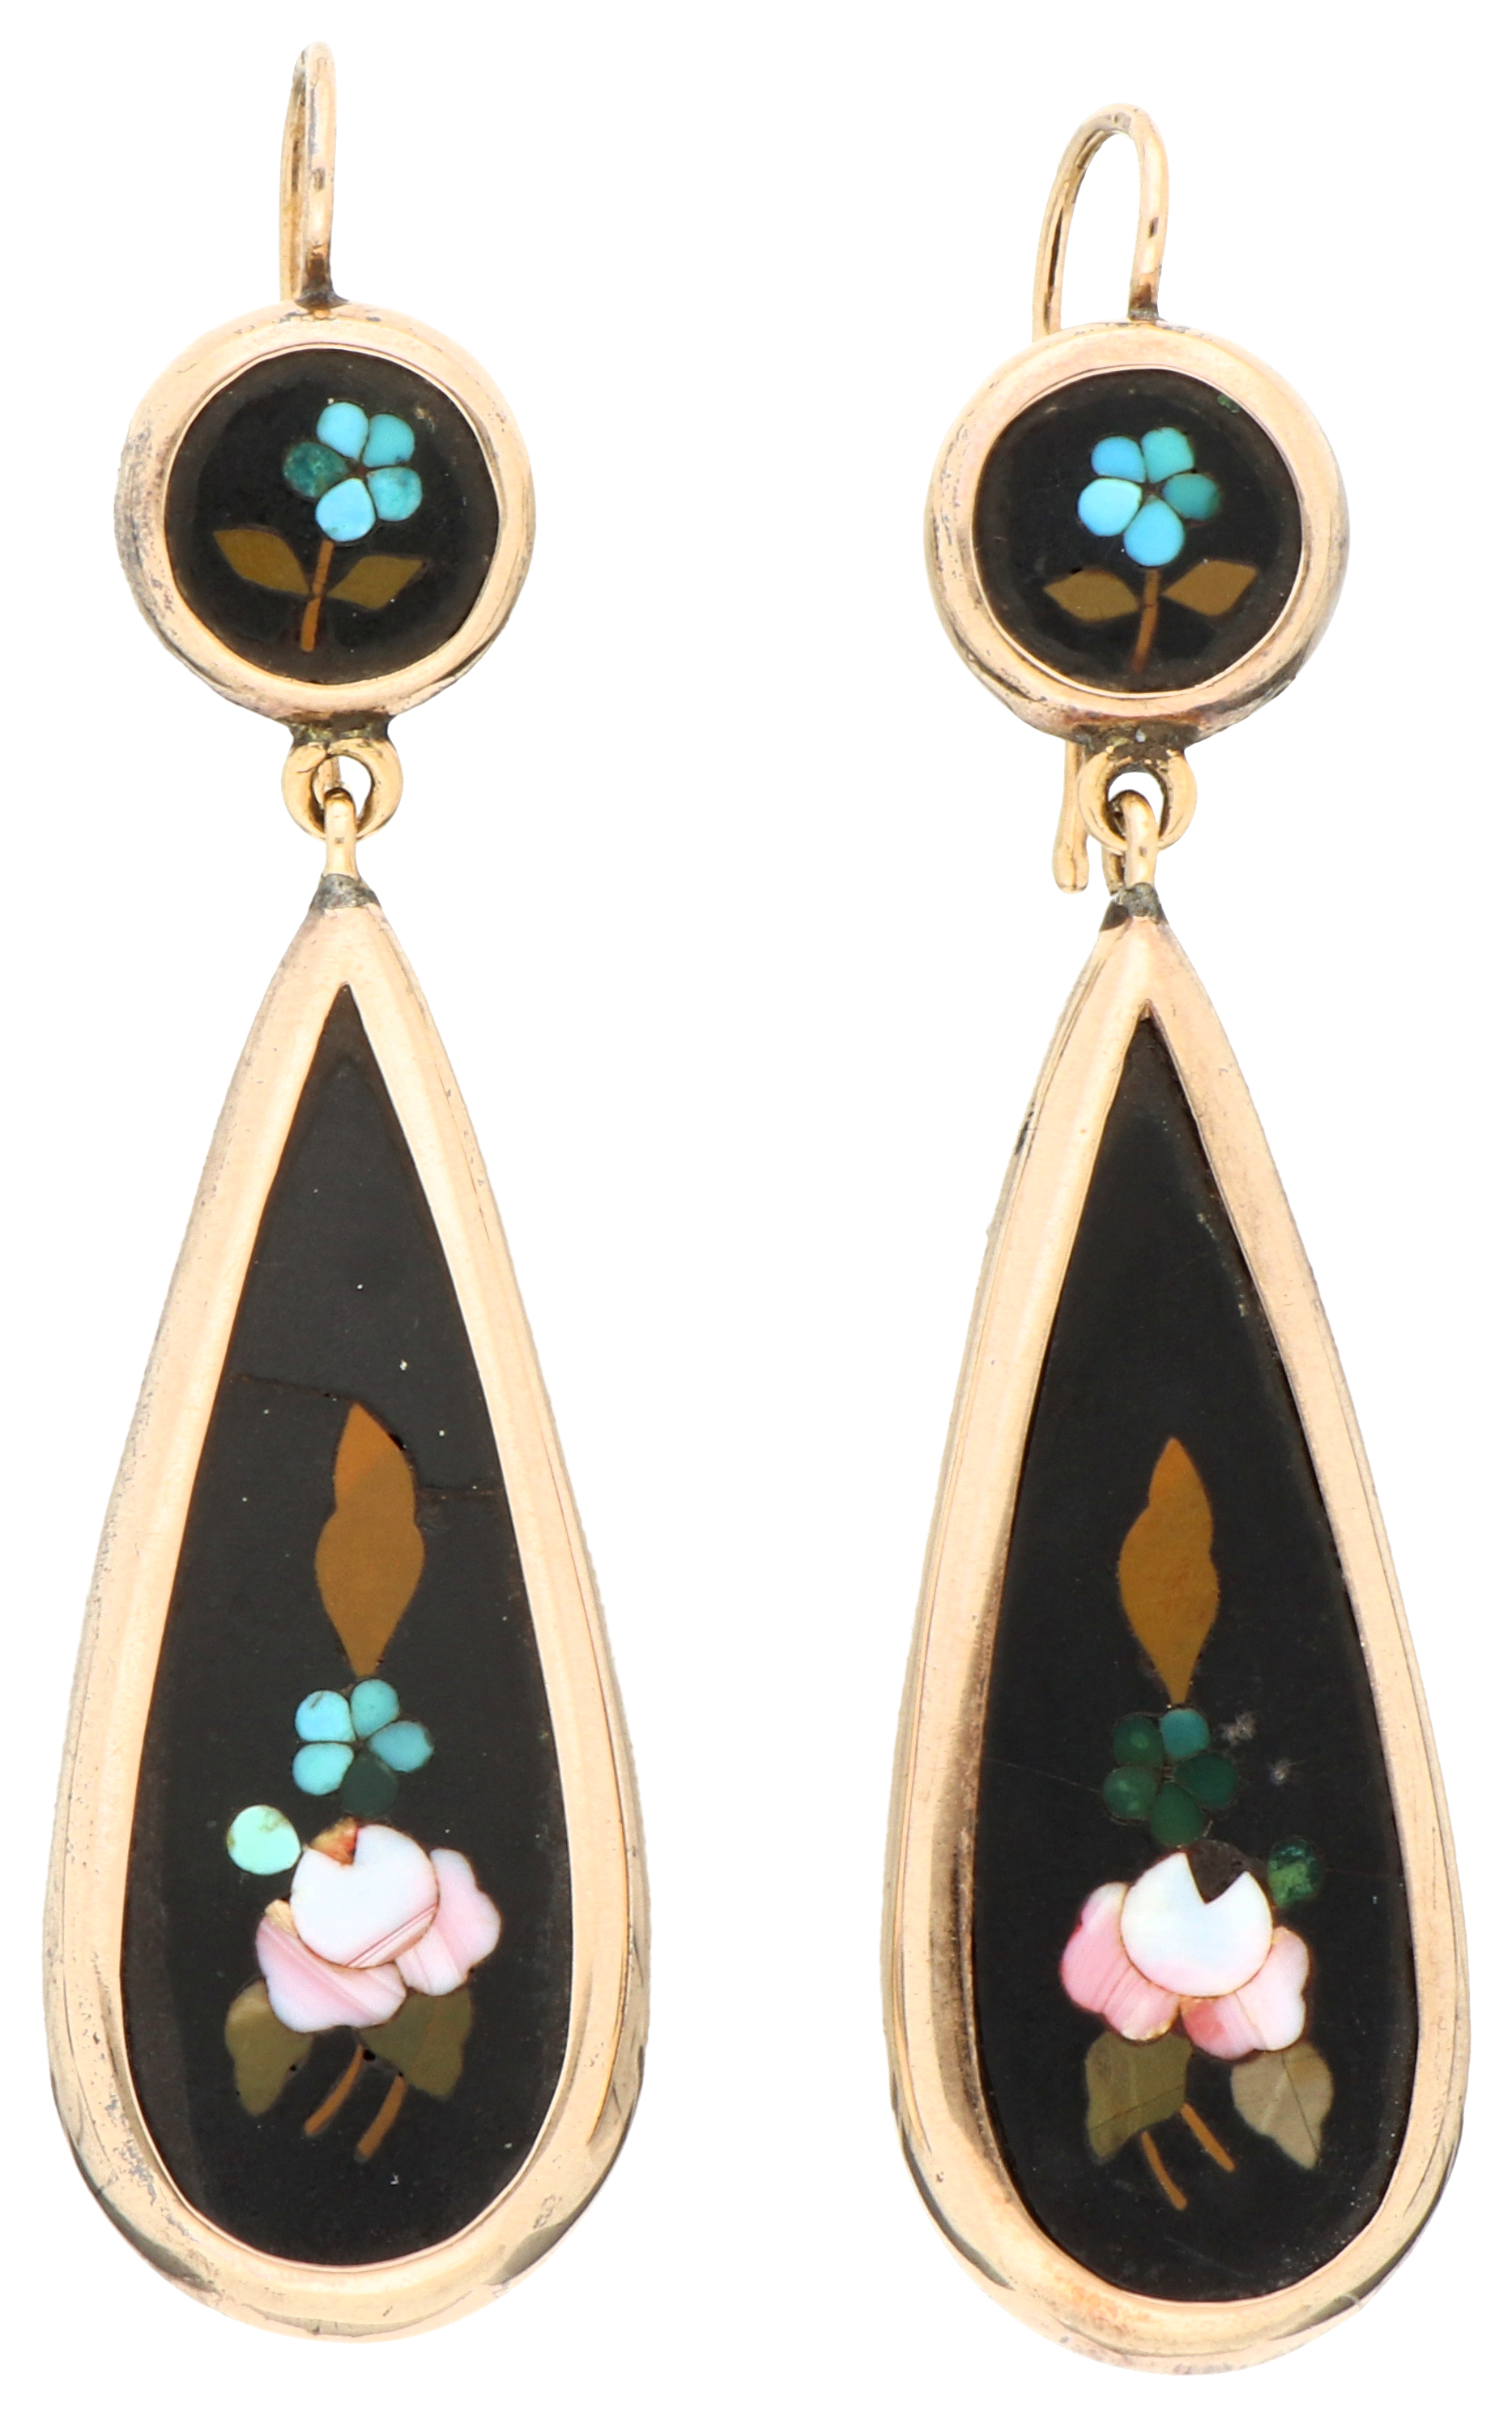 No Reserve - 12K yellow gold earrings with pietra dura.